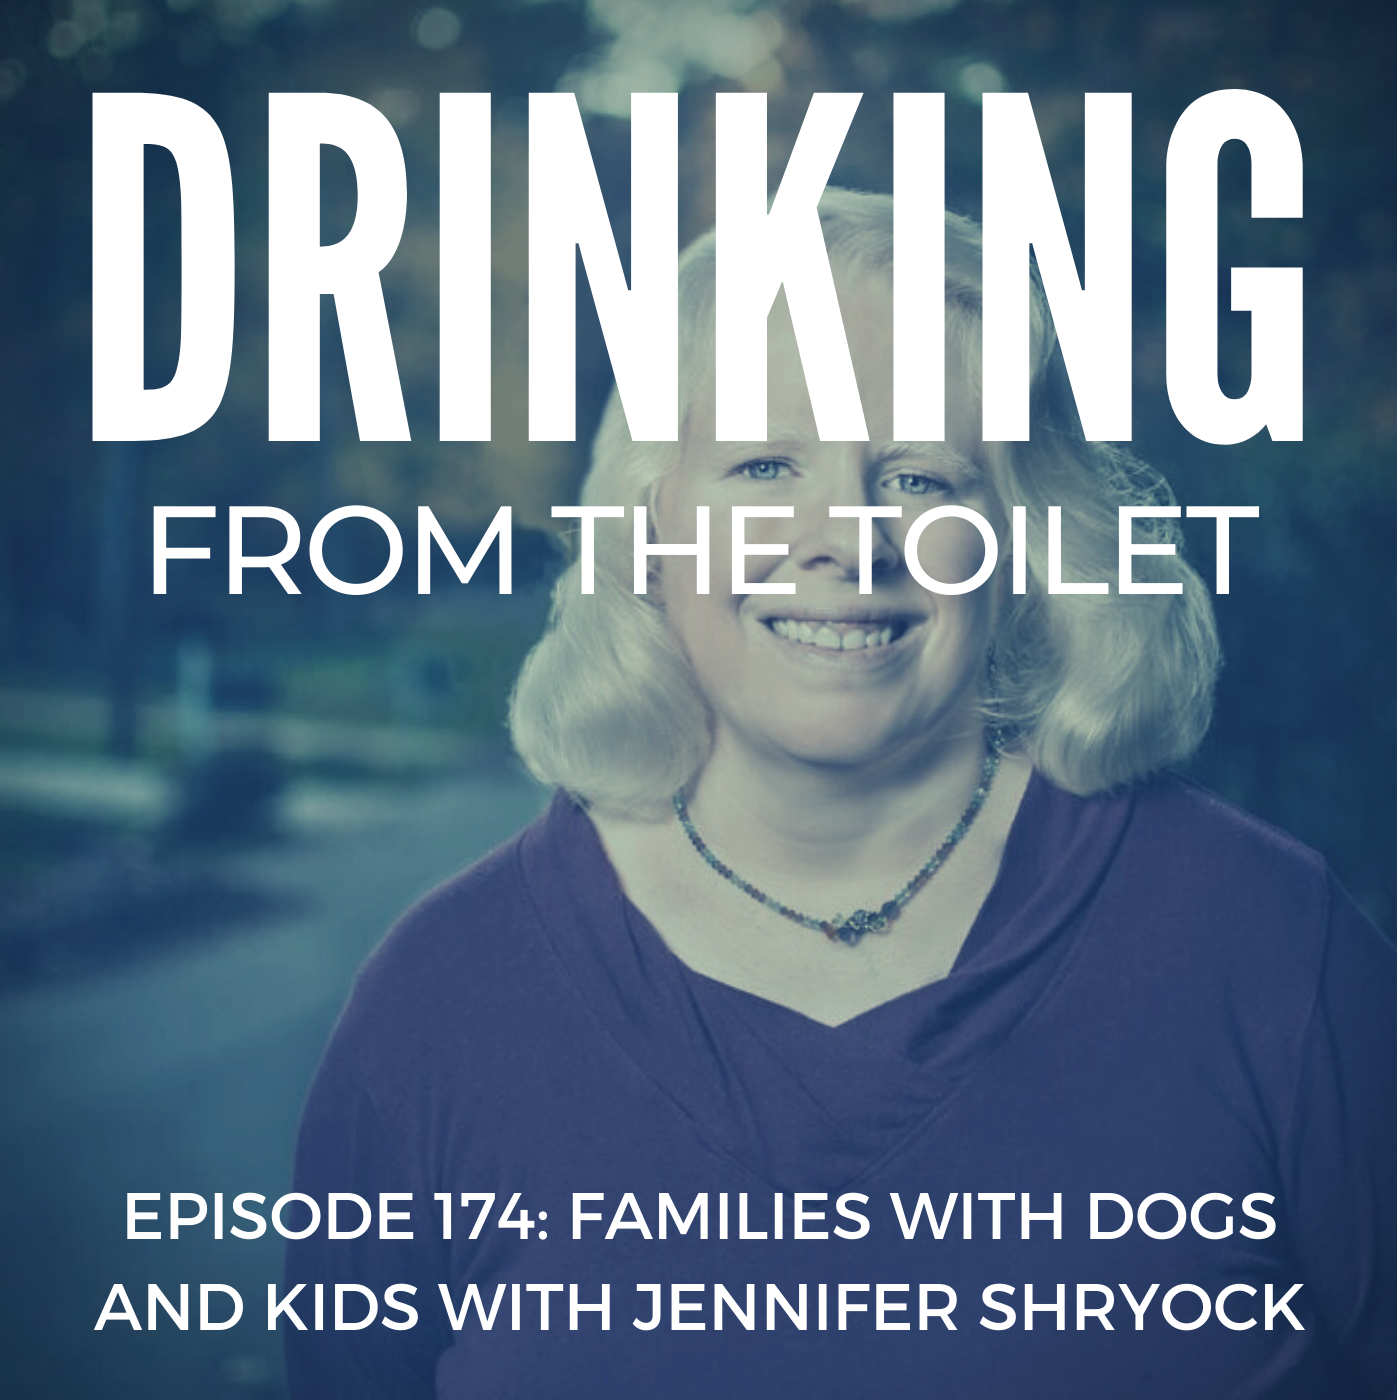 Podcast #174: Families with Dogs and Kids with Jennifer Shryock